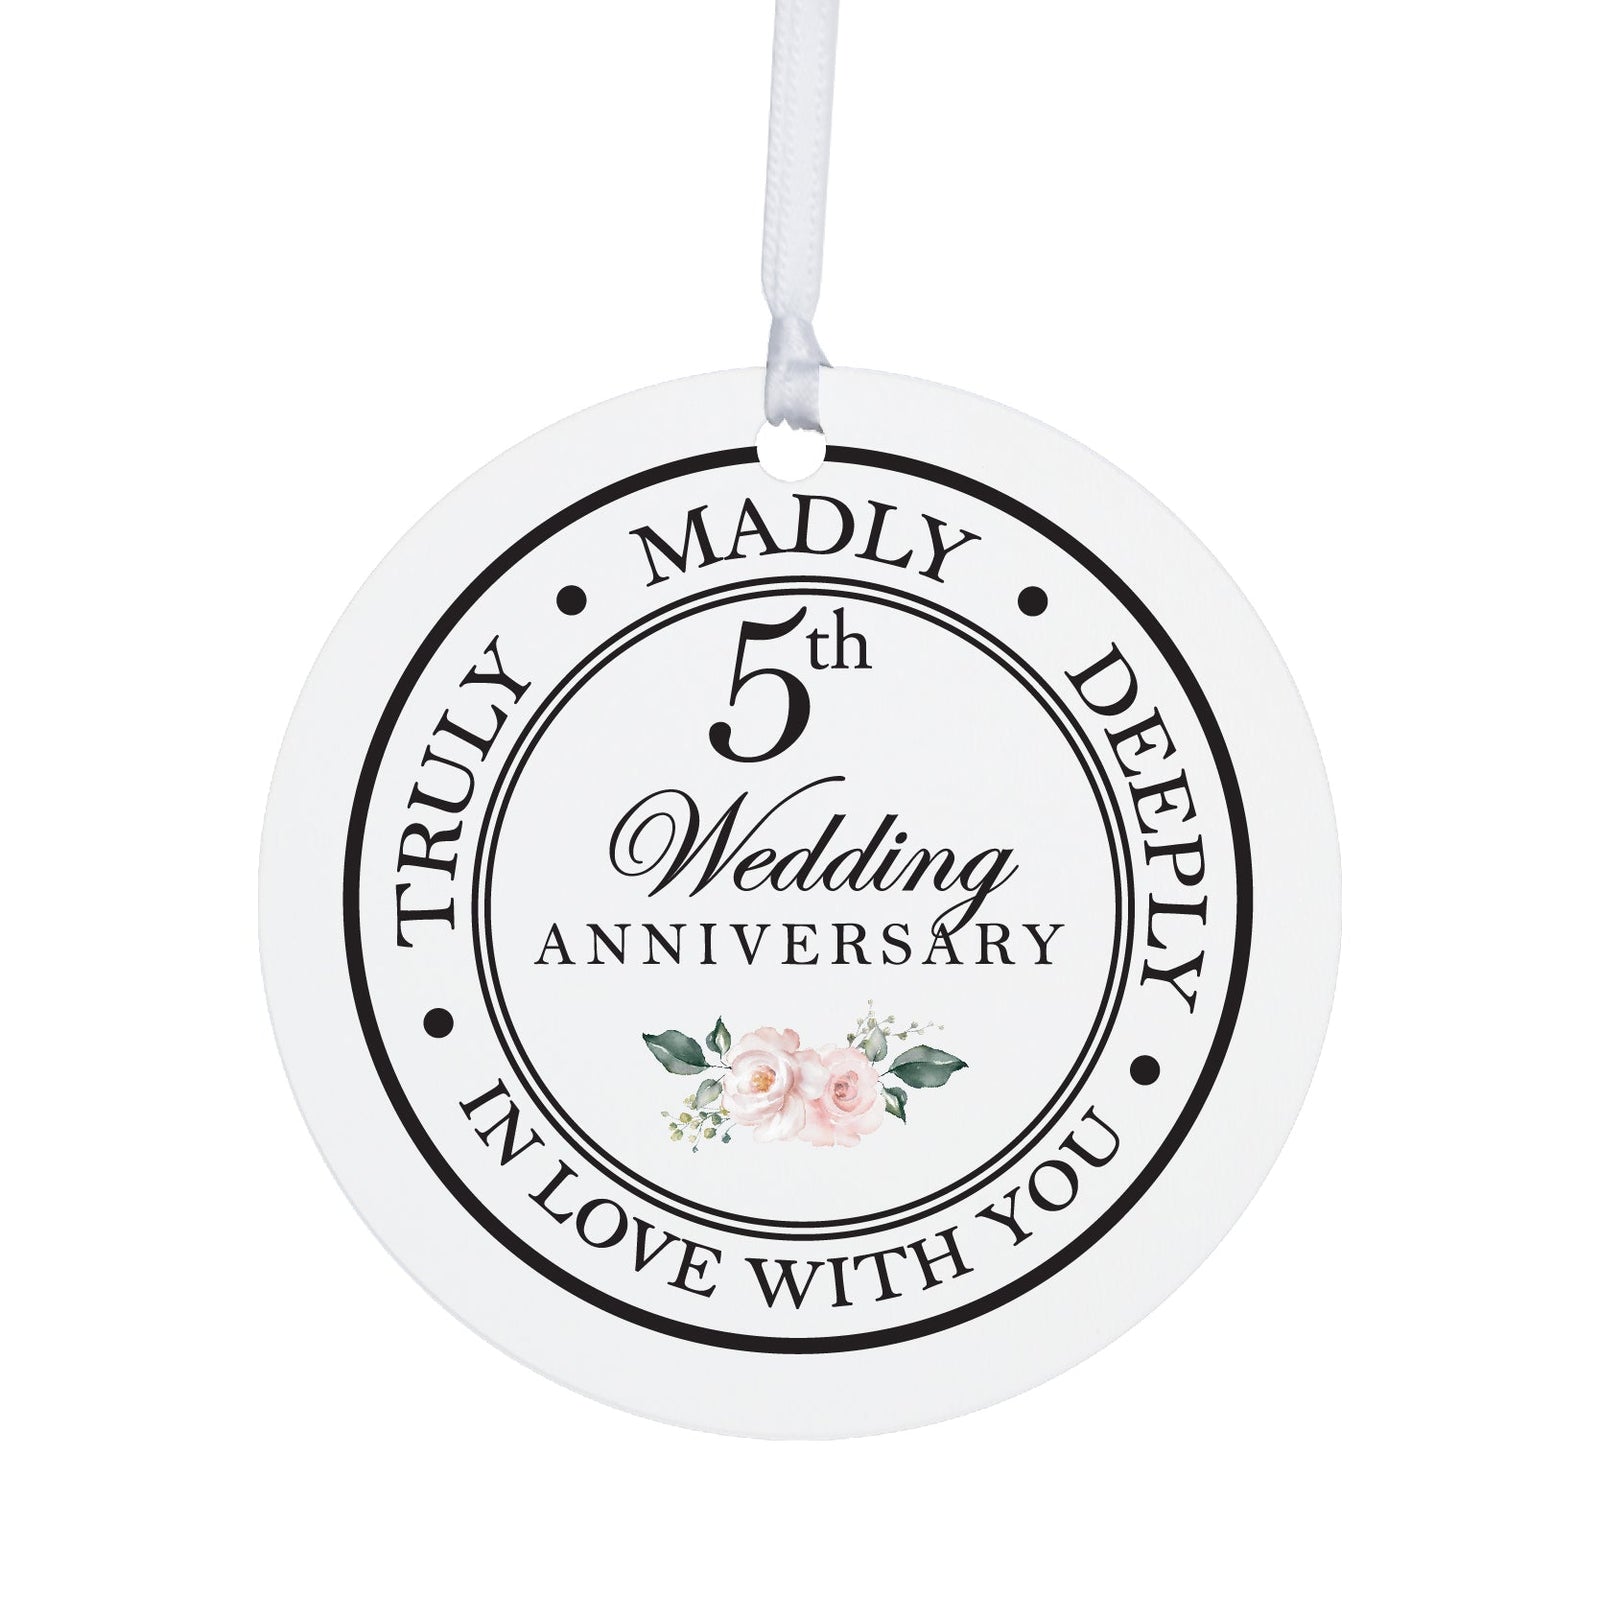 5th Wedding Anniversary White Ornament With Inspirational Message Gift Ideas - Truly, Madly, Deeply In Love With You